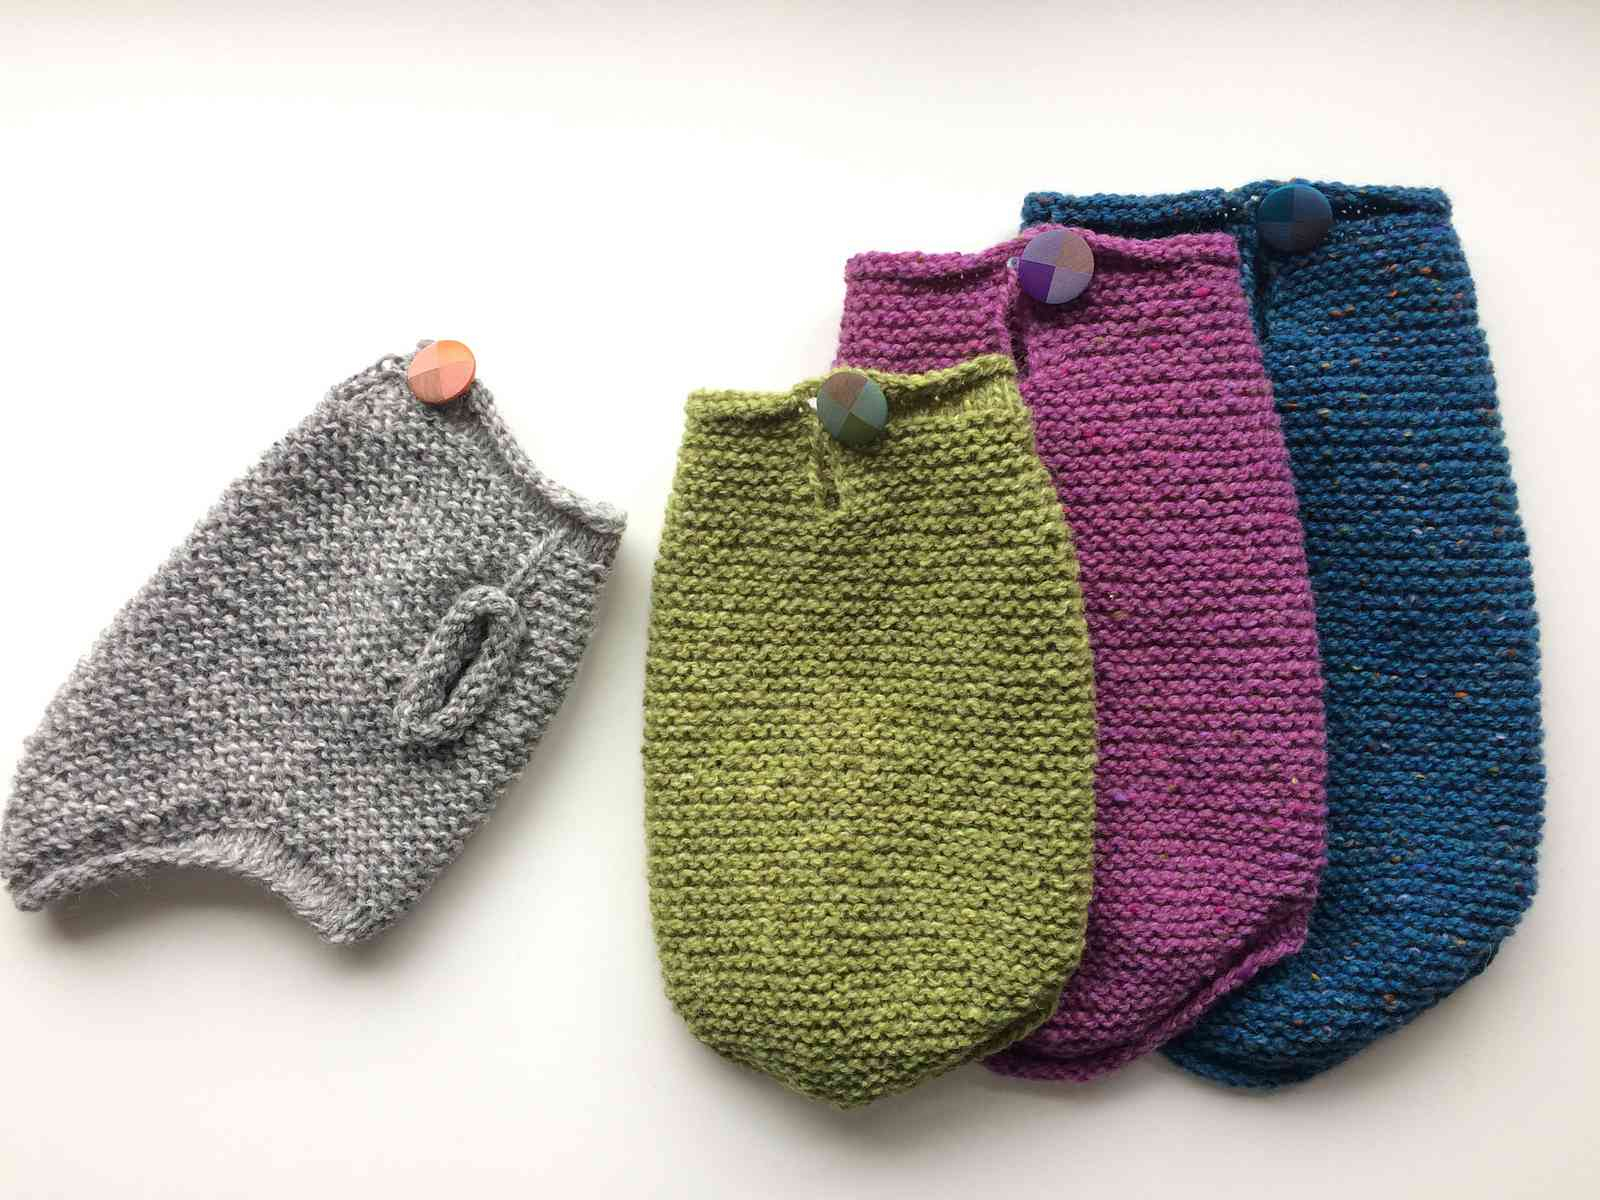 Free Sweater Patterns To Knit 12 Dog Sweaters And Other Knitting Patterns For Pups